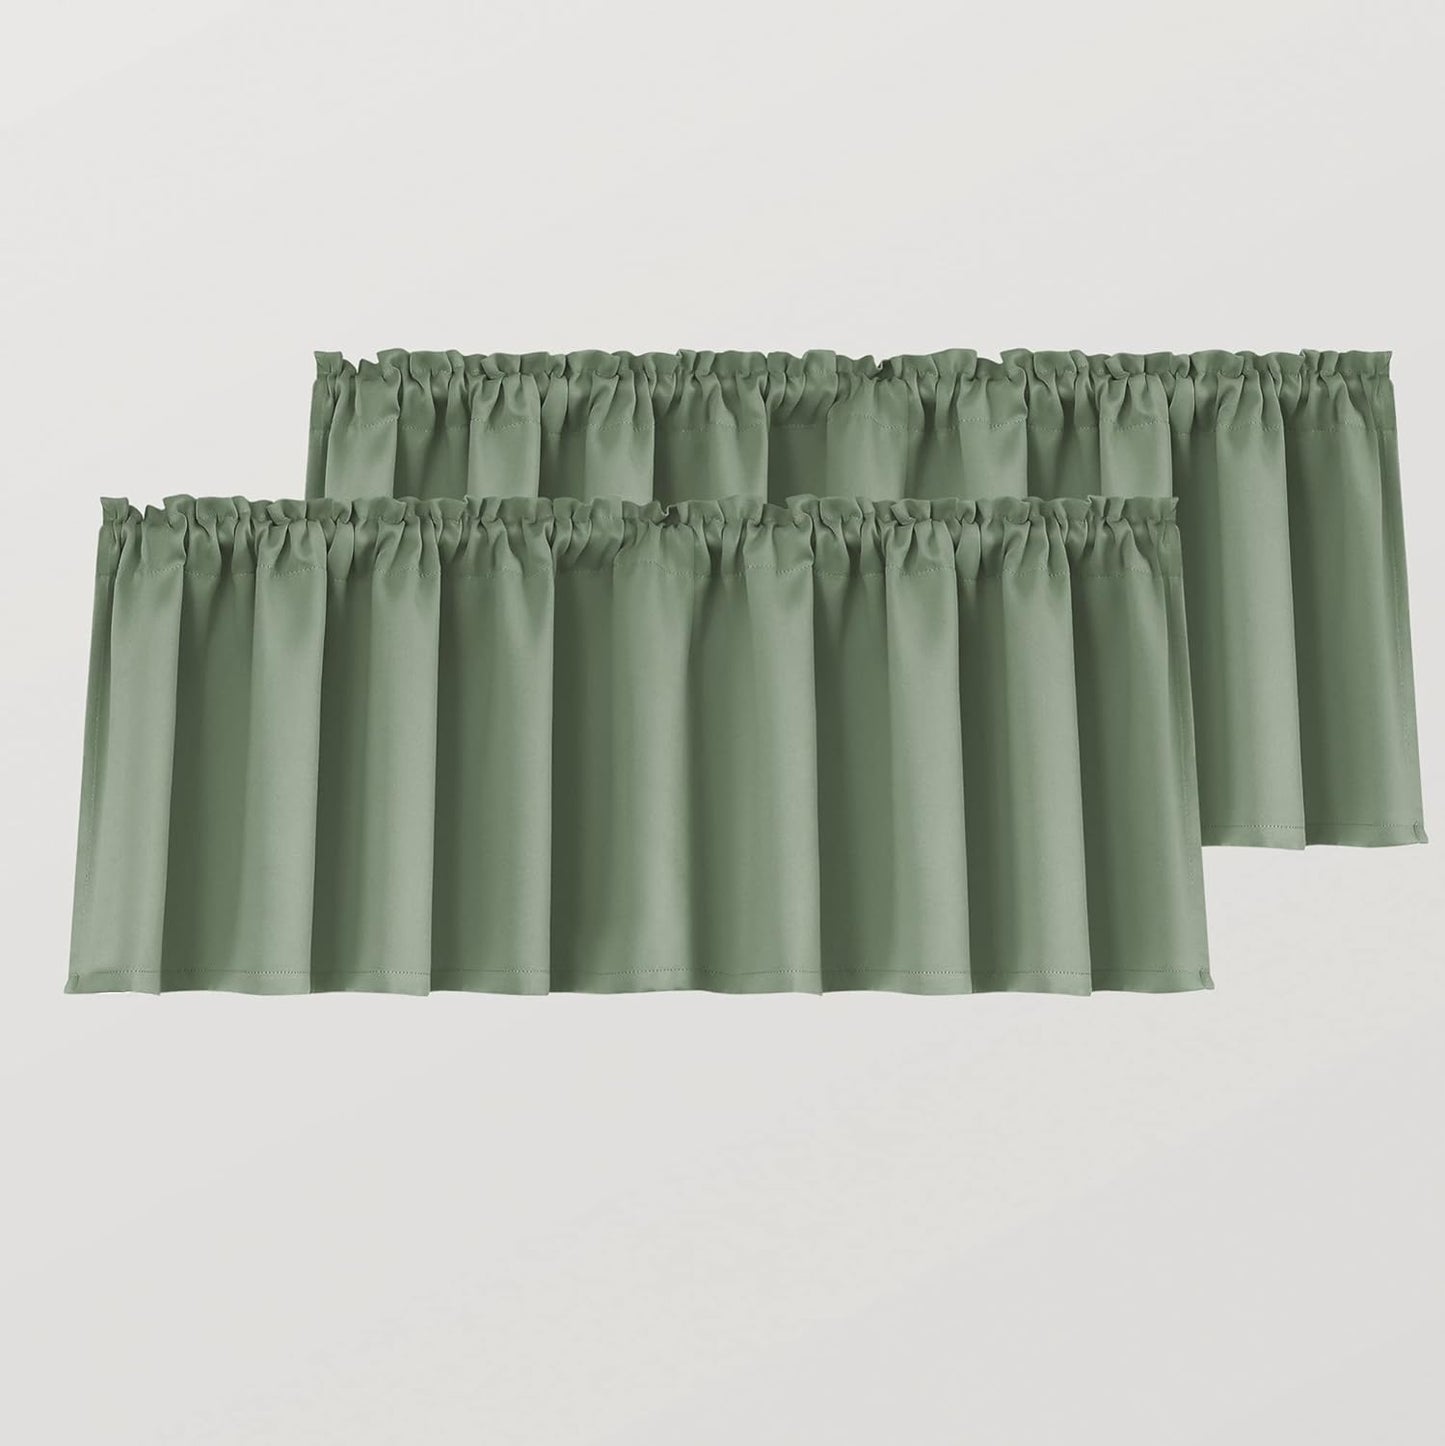 Mrs.Naturall Beige Valance Curtains for Windows 36X16 Inch Length  MRS.NATURALL TEXTILE Sage Green 52X18 